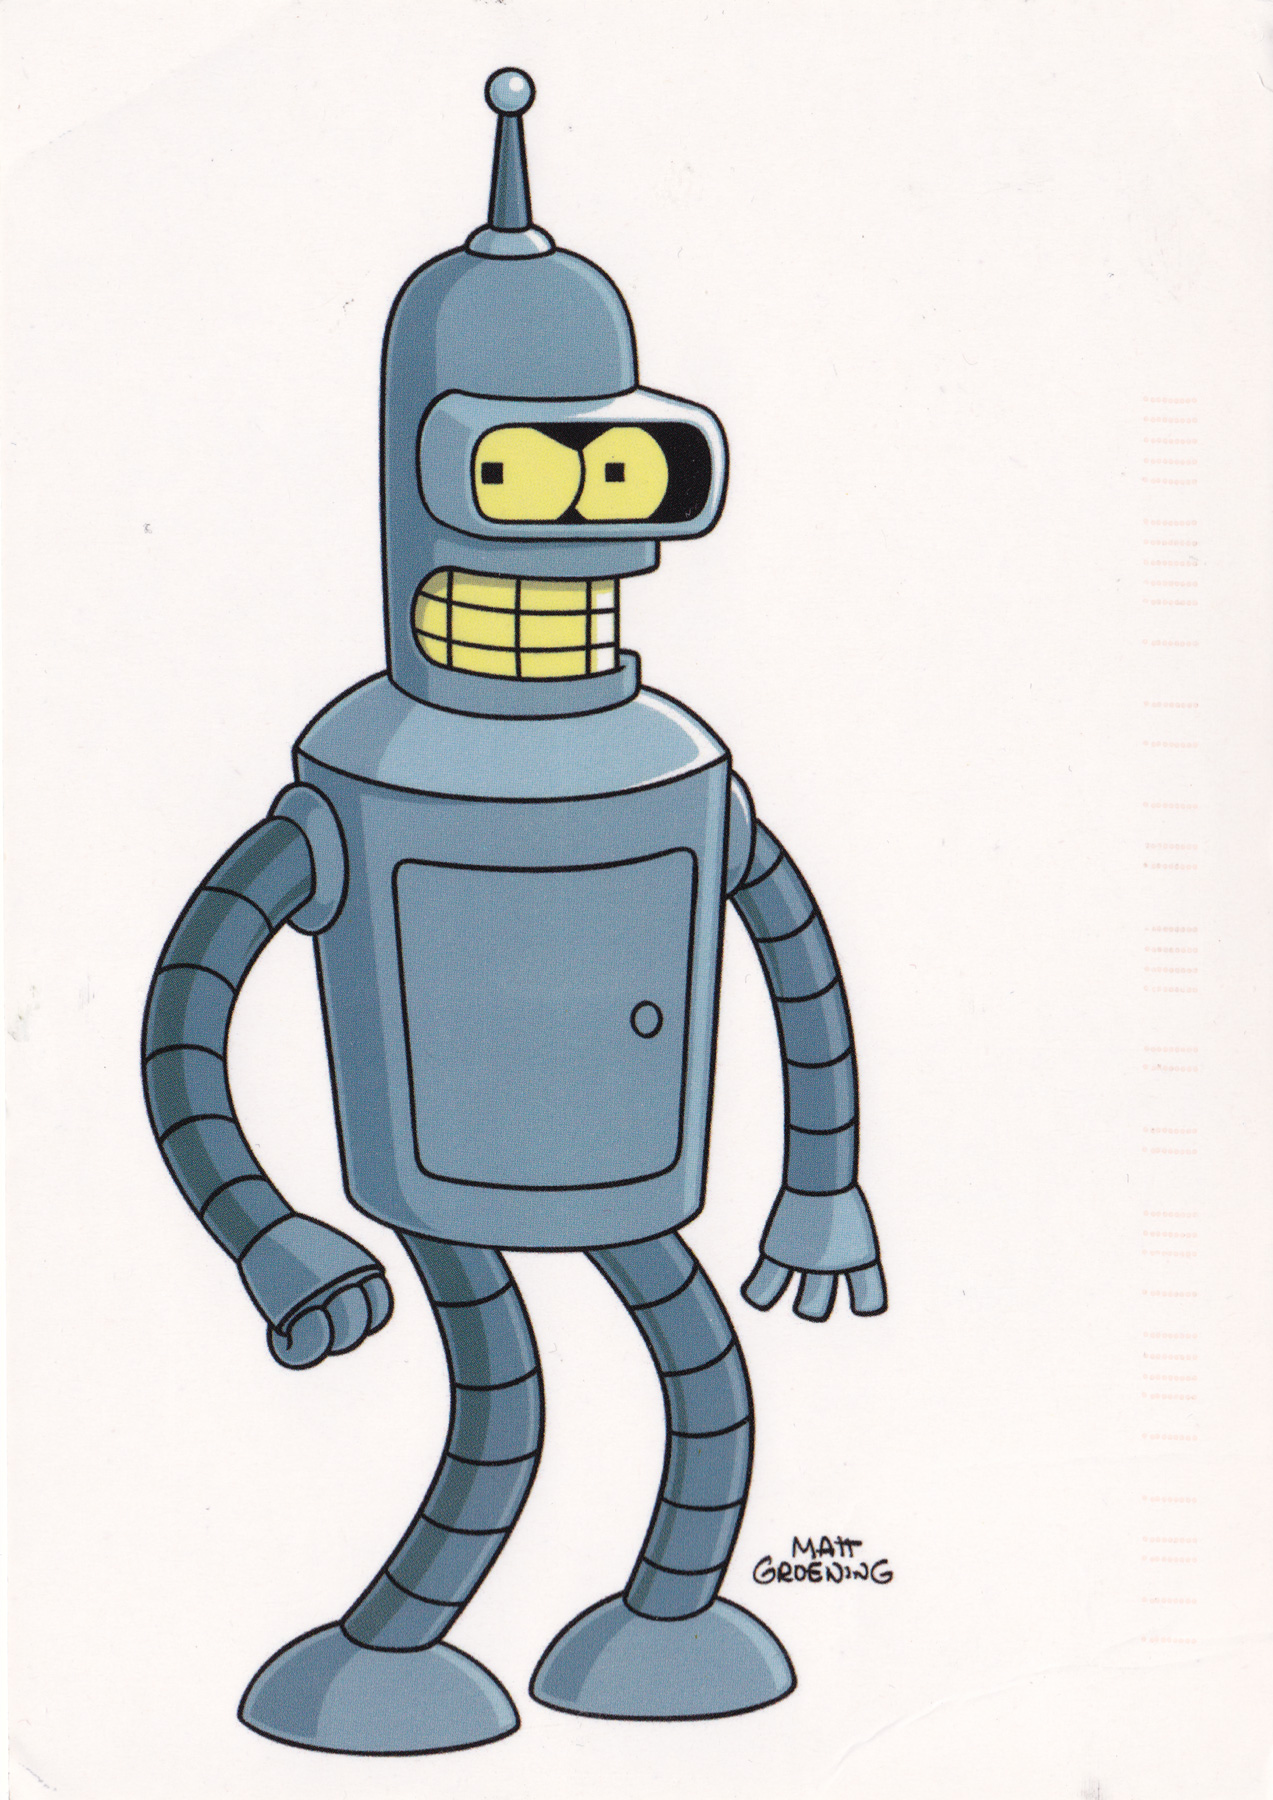 Bender Meaning and Definition